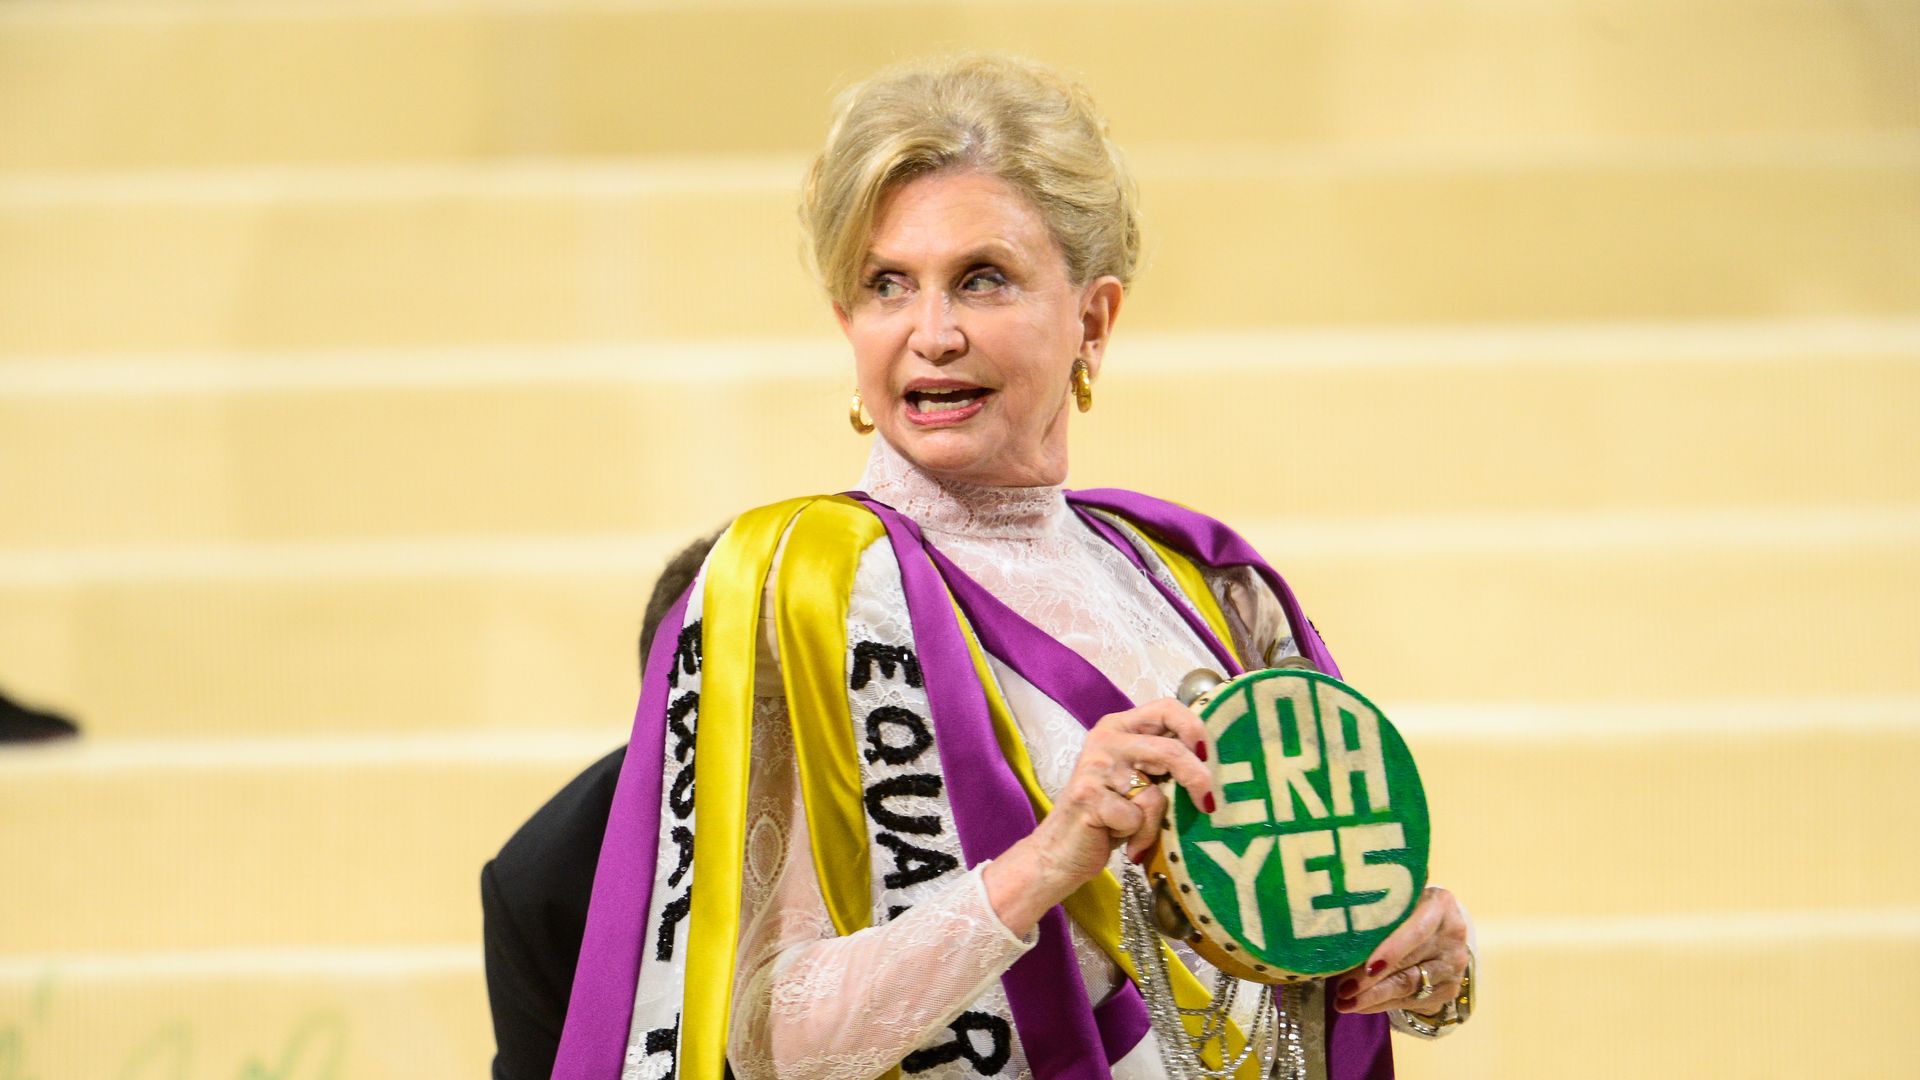 Rep. Carolyn Maloney at the Met Gala in a yellow, green, purple and white outfit touting the Equal Rights Amendment.